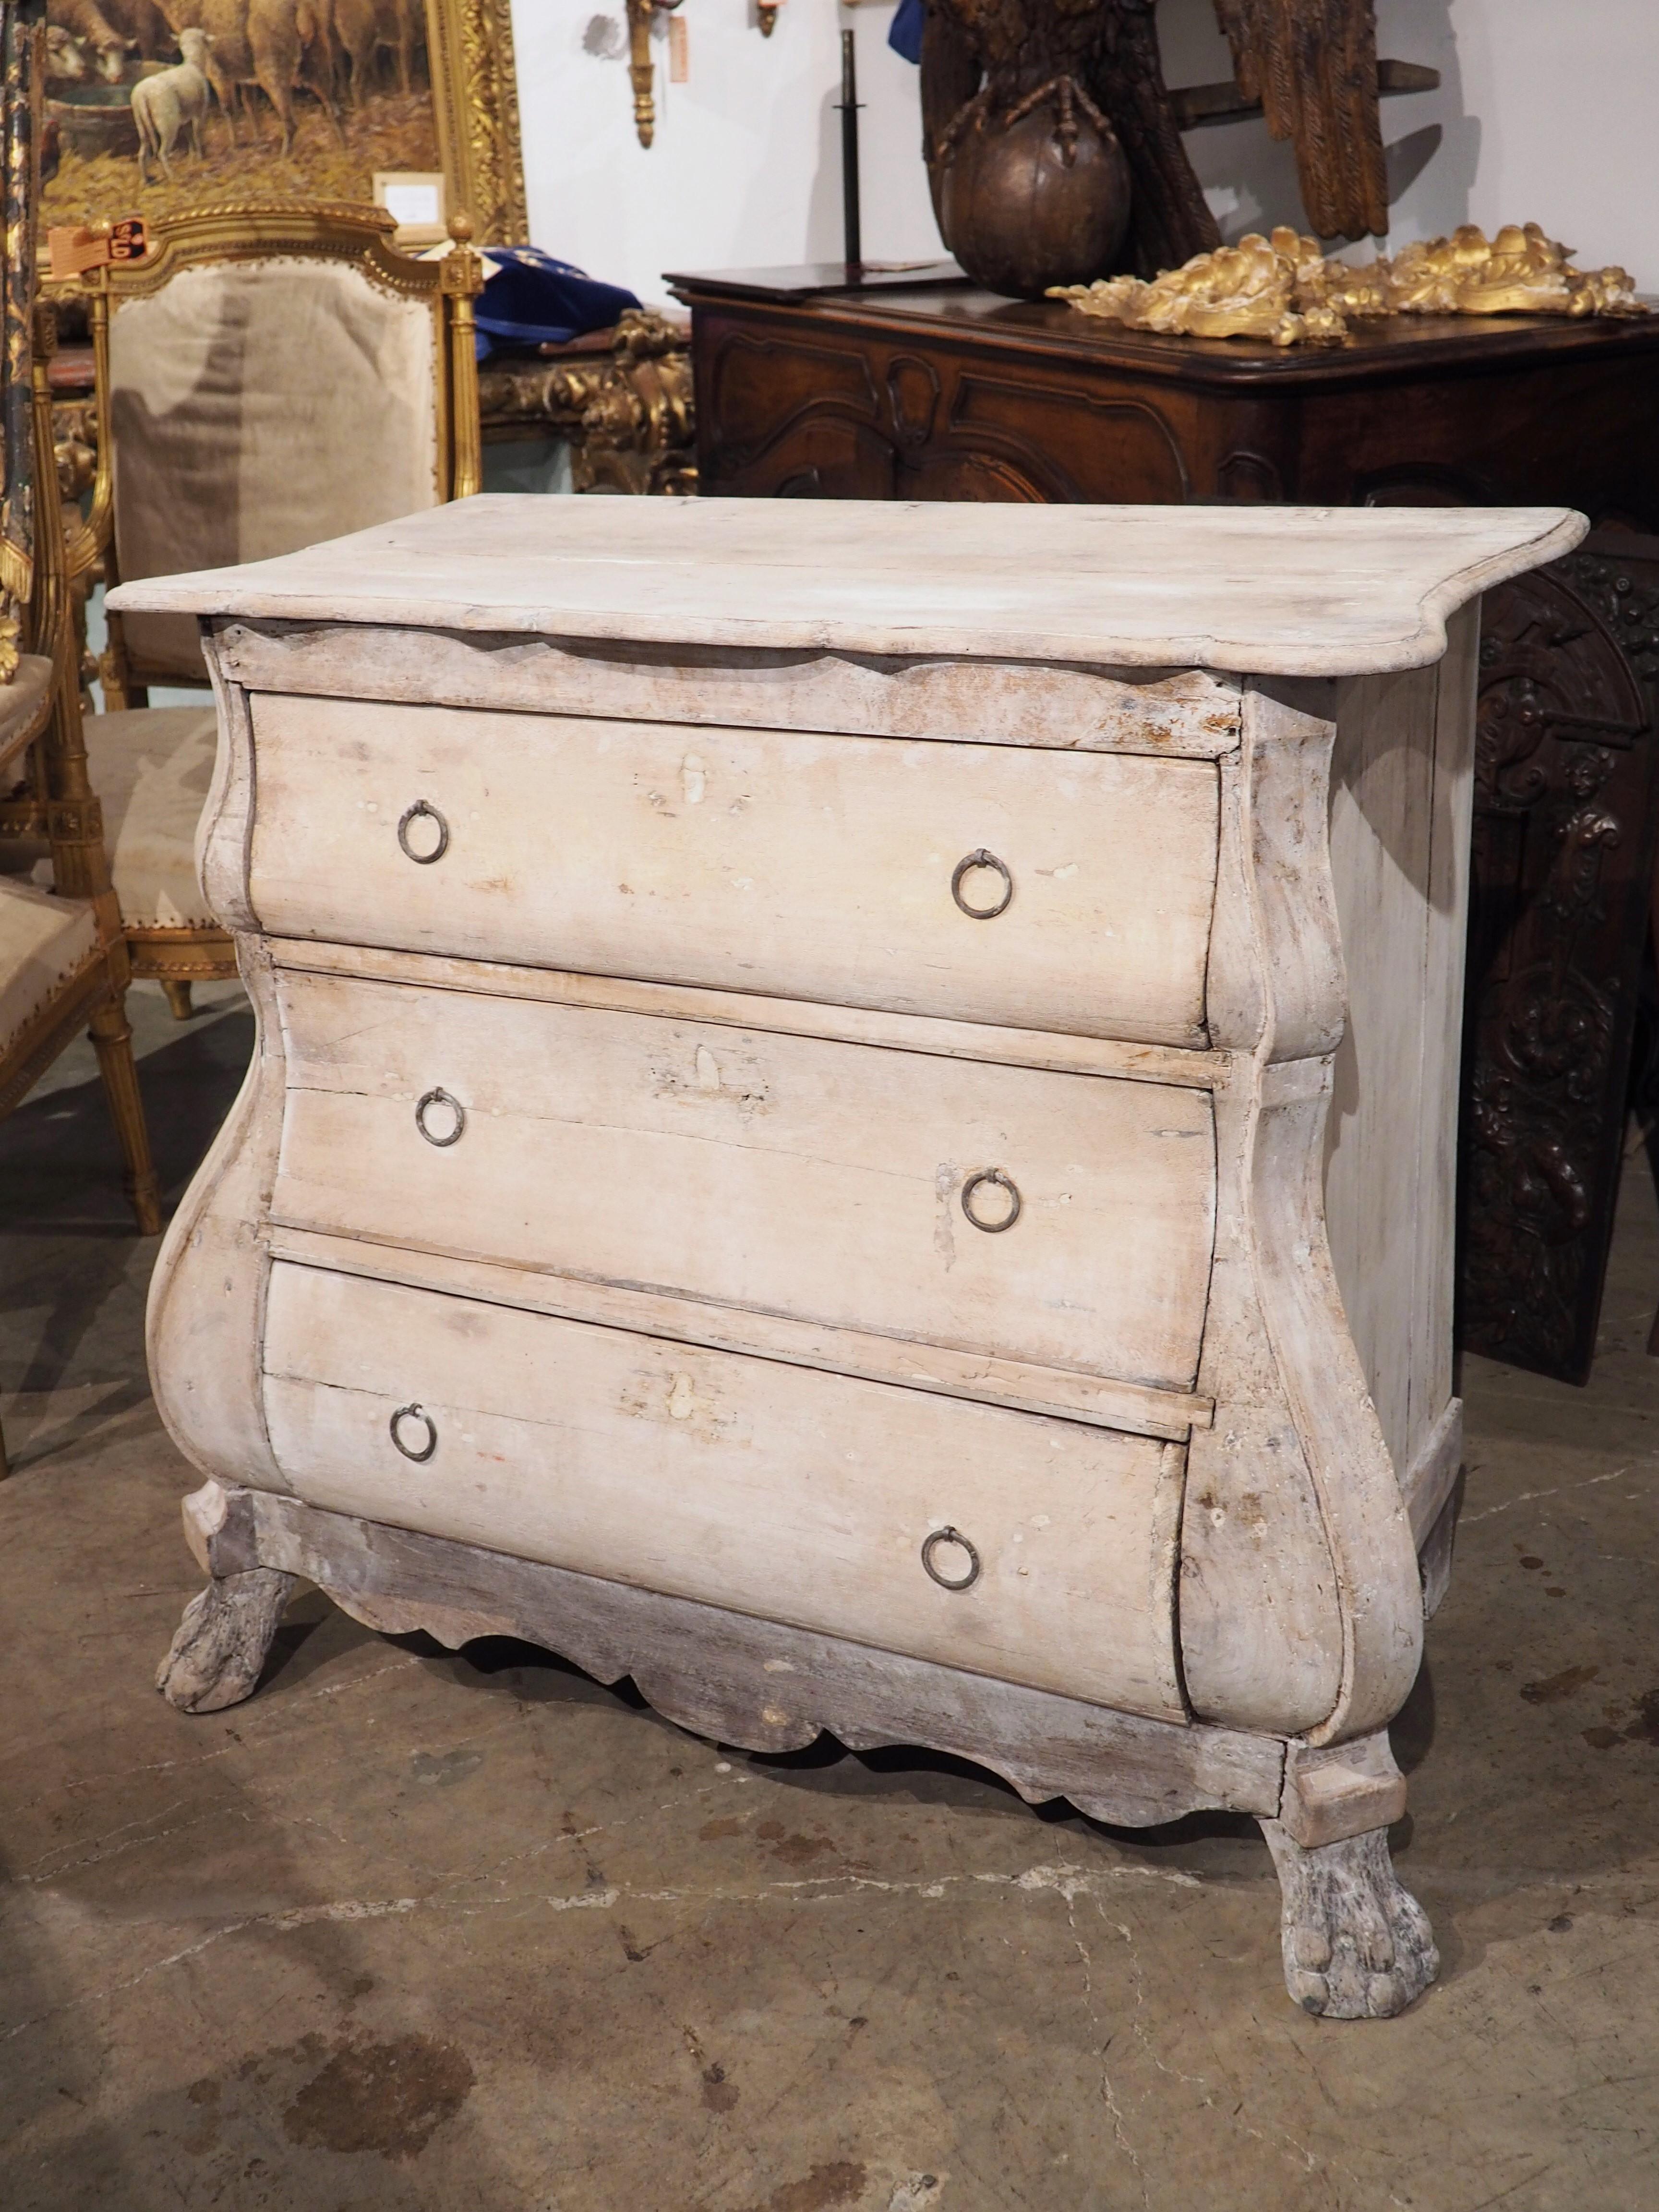 A very unique small chest of drawers, hand-carved in the Netherlands, circa 1780, the wood has been whitewashed at some point over the last 250 years, resulting in an ashen white color with hints of cream and beige. The shapely commode has a bombe